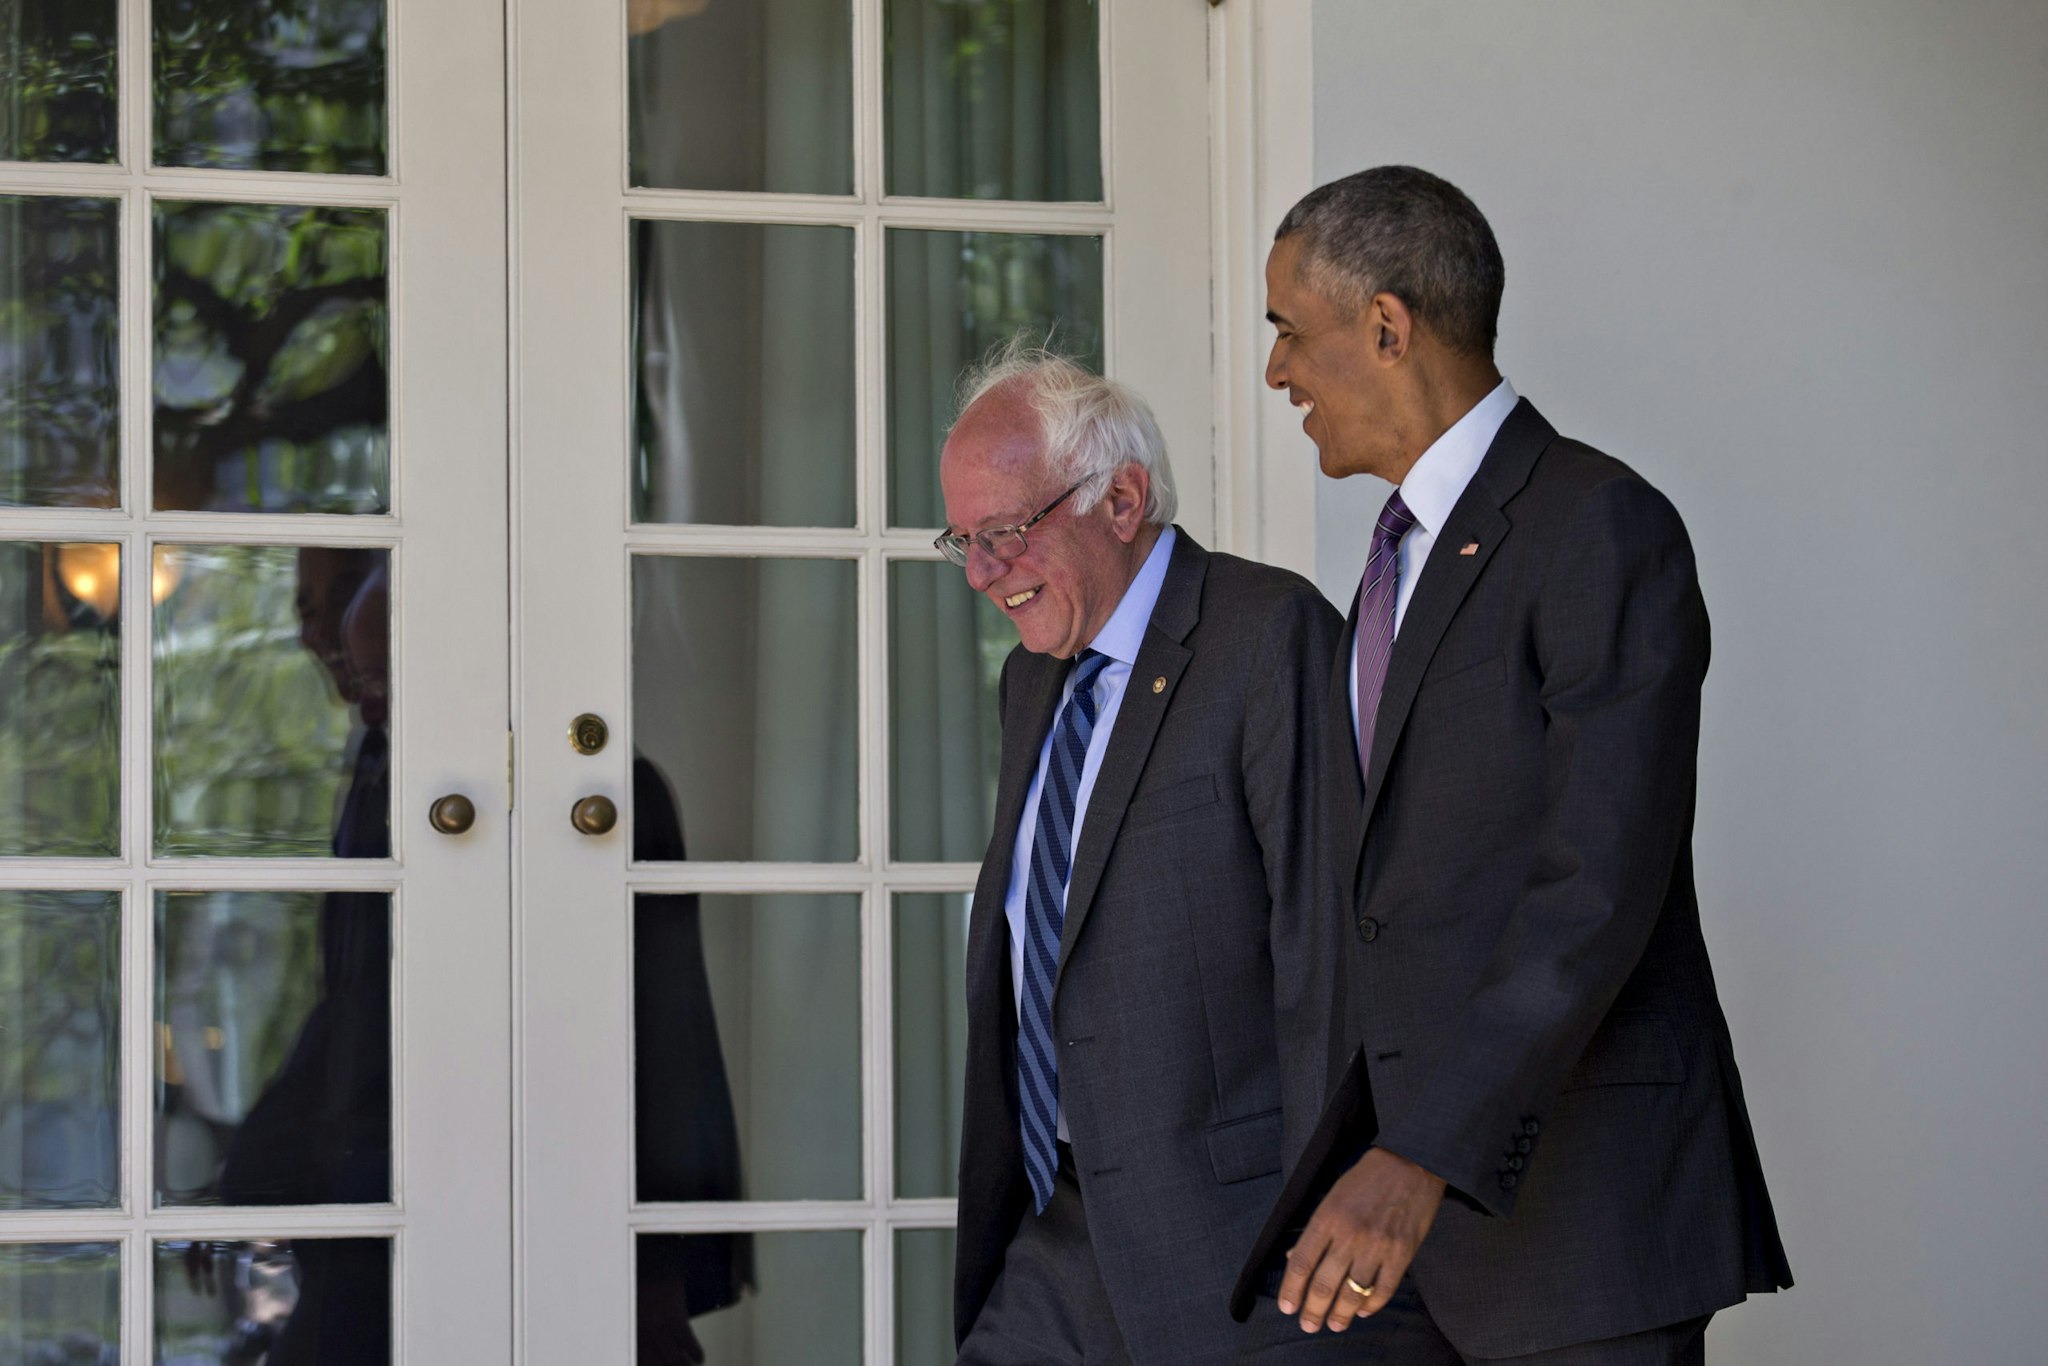 U.S. President Barack Obama, right, and Senator Bernie Sanders, an independent from Vermont and 2016 Democratic presidential candidate, walk to the Oval Office of the White House in Washington, D.C., U.S., on Thursday, June 9, 2016. Obama said yesterday he expects Democrats to unify soon behind their presumptive presidential nominee, Hillary Clinton, and that her divisive primary contest with Sanders was healthy for the party. Photographer: Andrew Harrer/Bloomberg via Getty Images